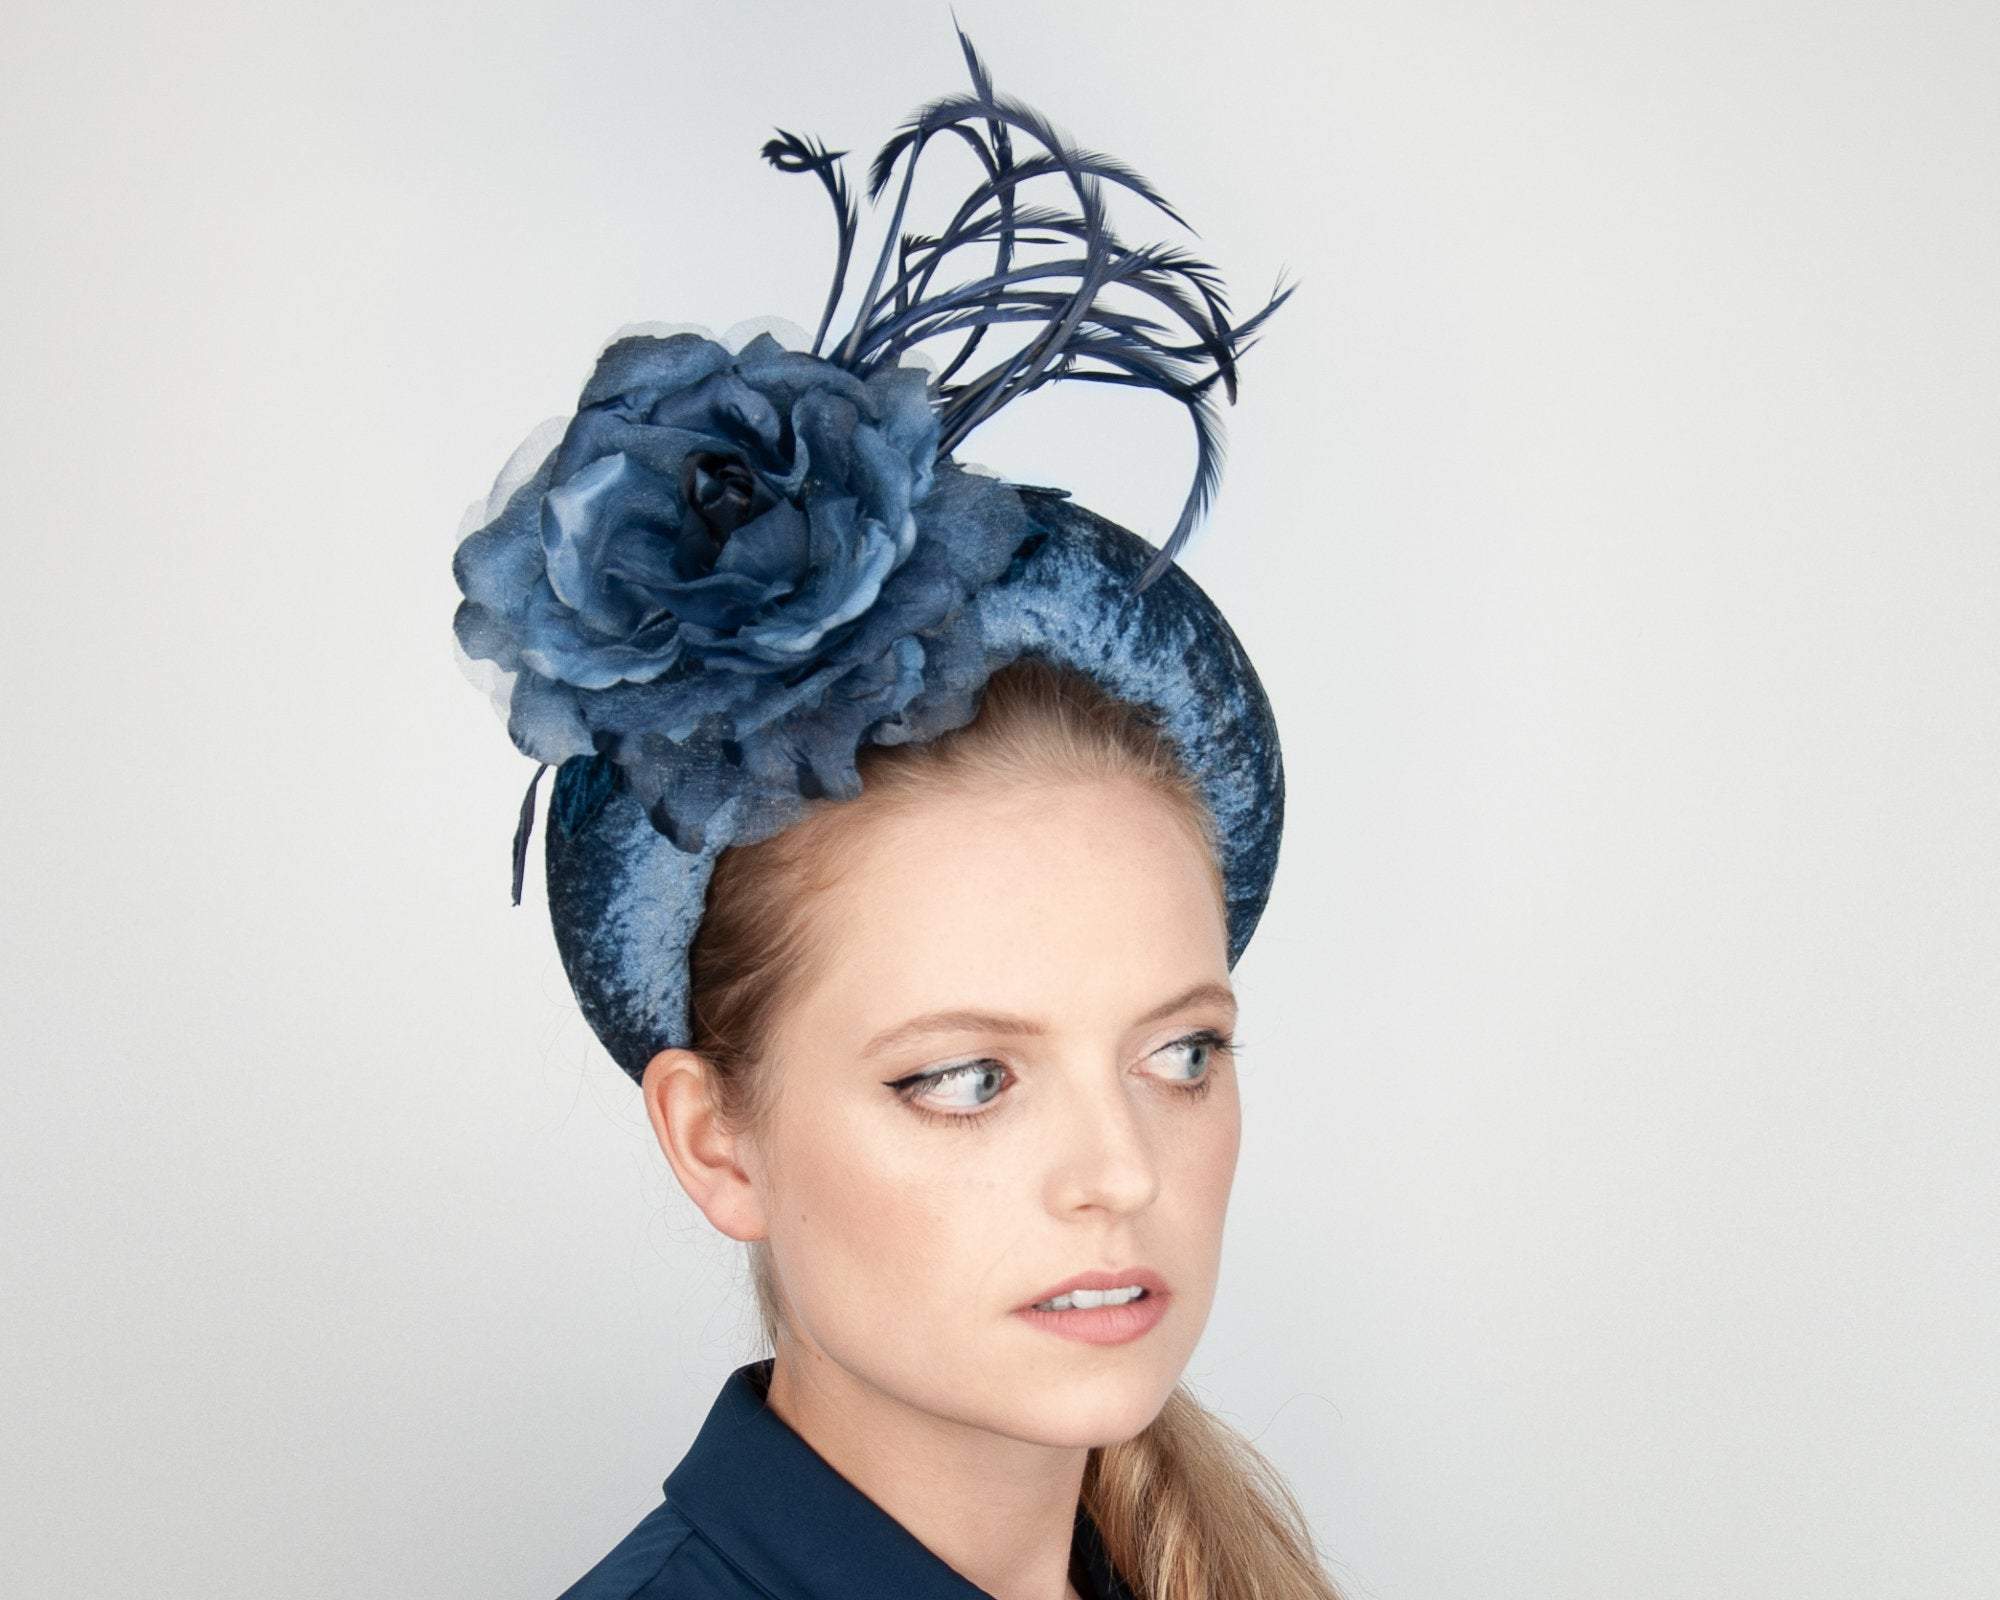 HAIR CIRCLET - BOLD VELVET HEADBAND WITH A ROSE AND FEATHERS IN MANY SHADES OF BLUE LIKE BLUESTONE, POWDER, LIGHT AND NAVY BLUE. © Seegang Berlin